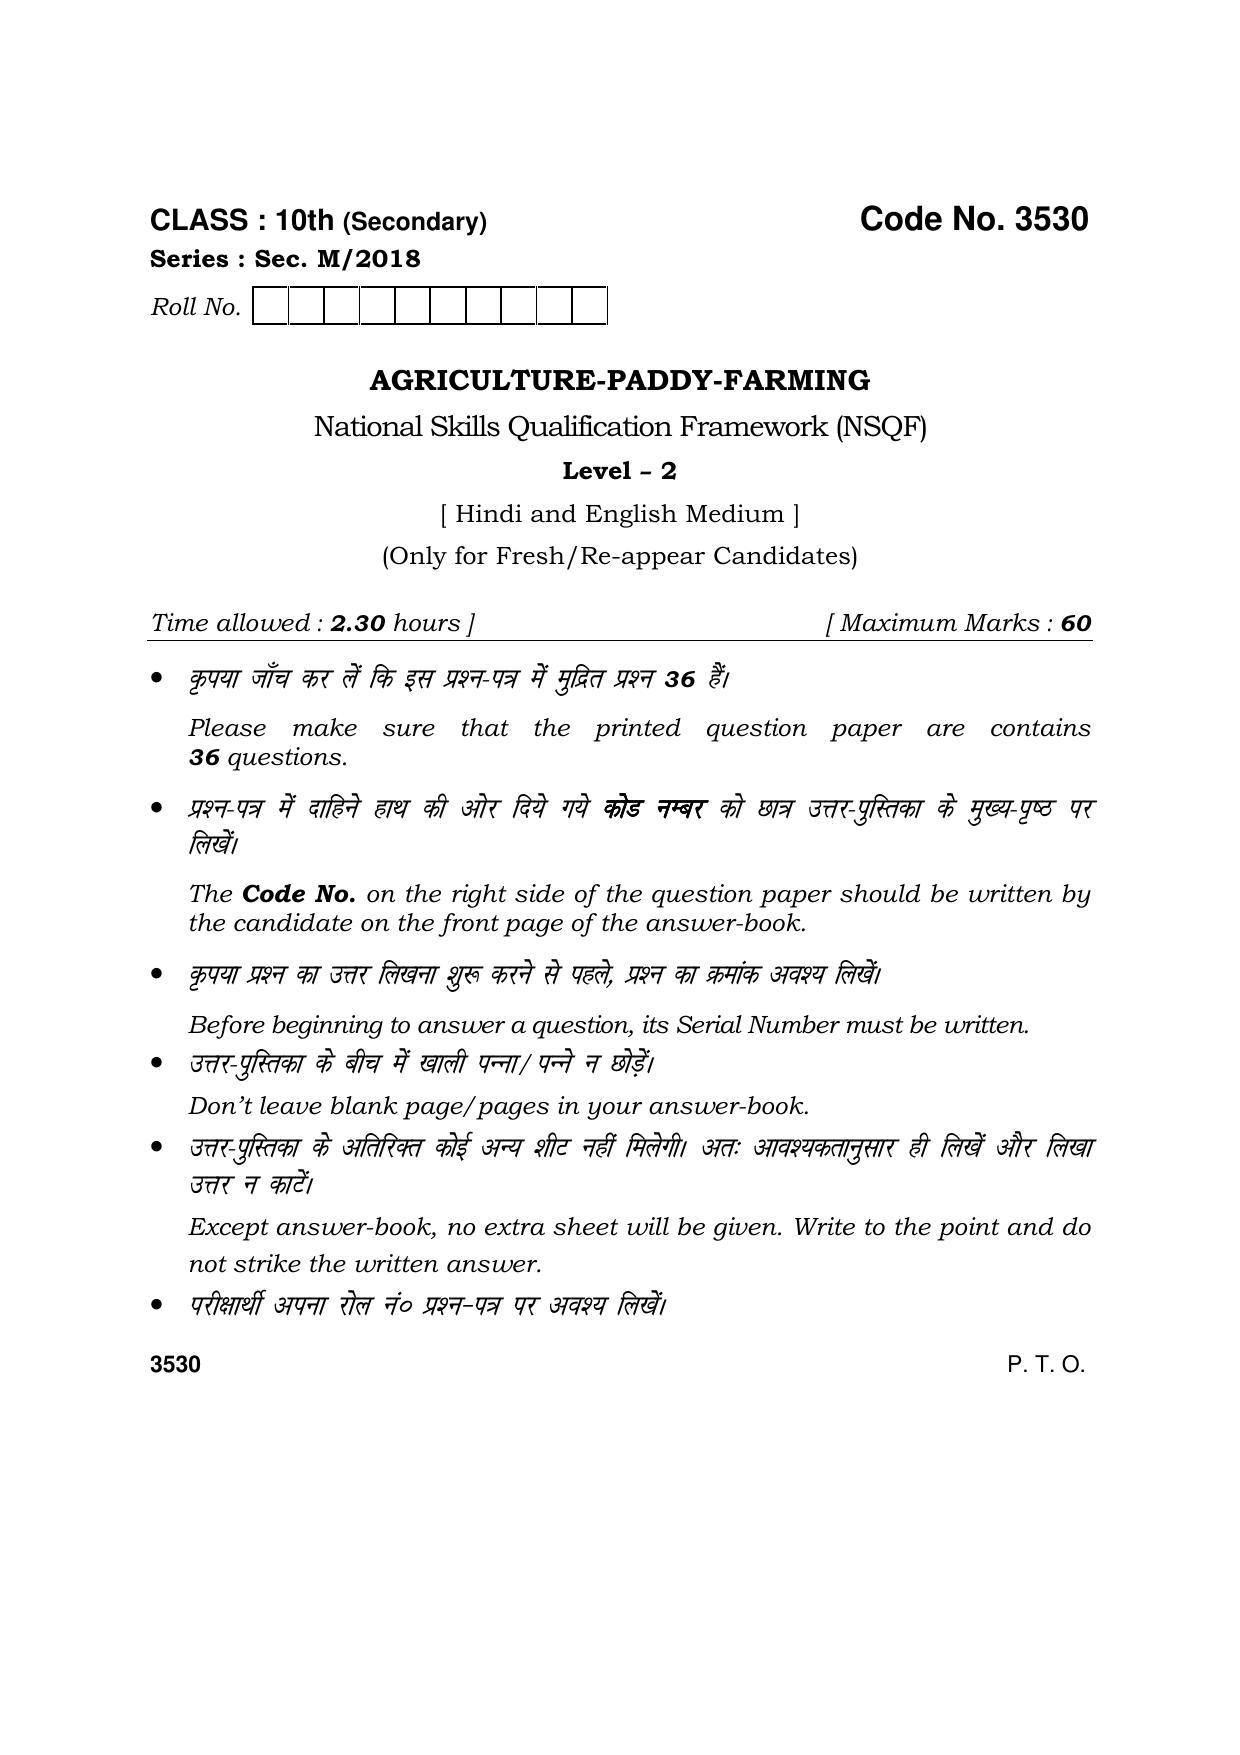 Haryana Board HBSE Class 10 Agriculture Paddy Farming 2018 Question Paper - Page 1